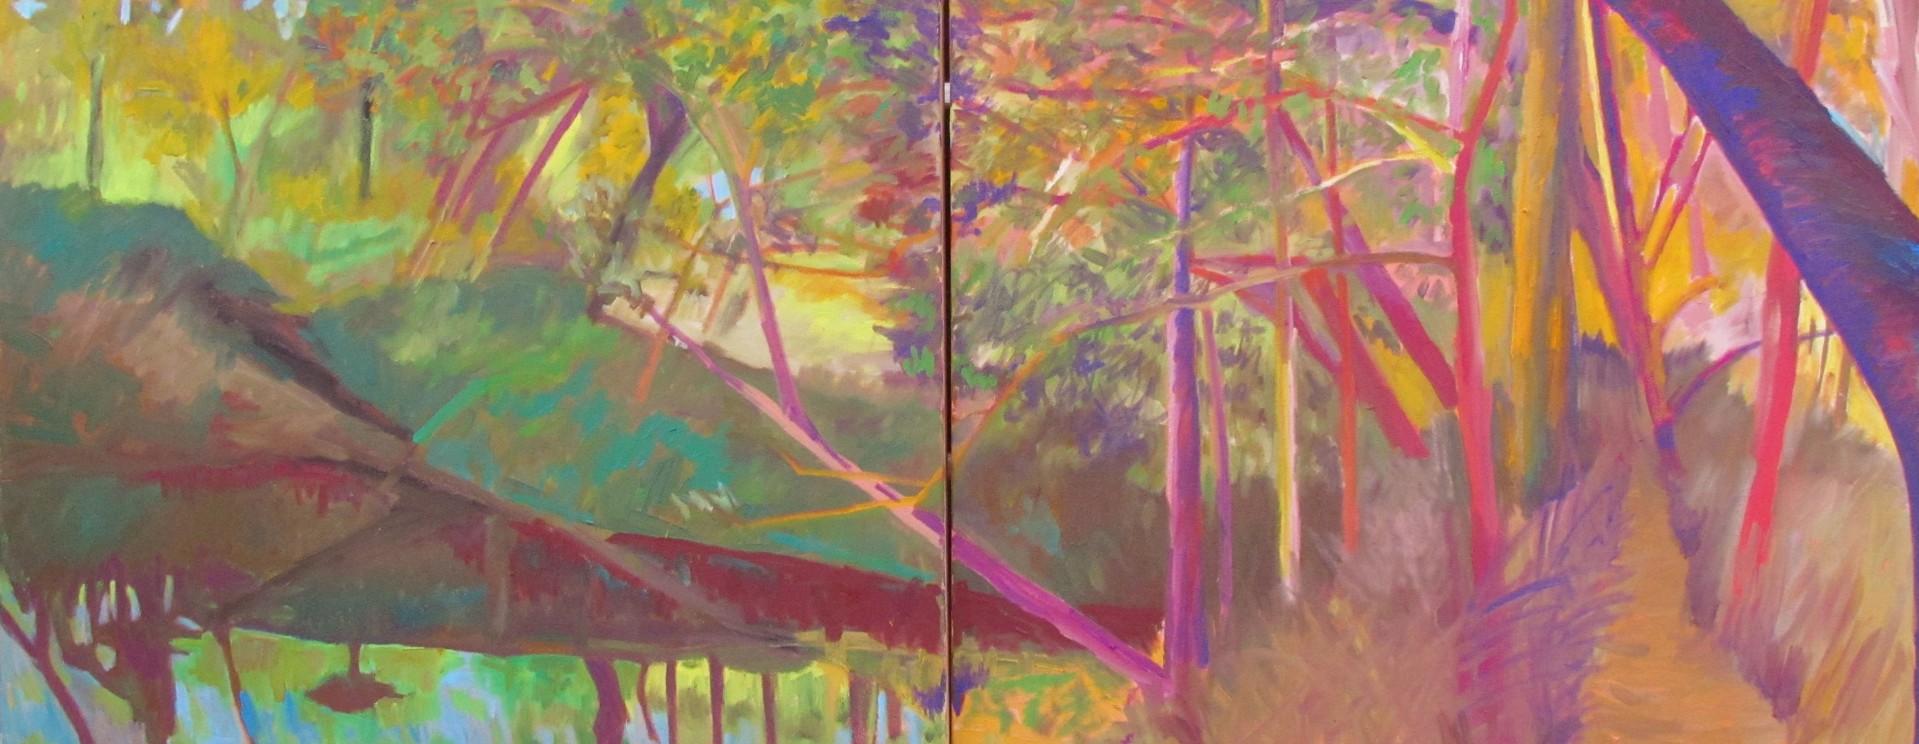 River Path Light (diptych) by Kate Trepagnier